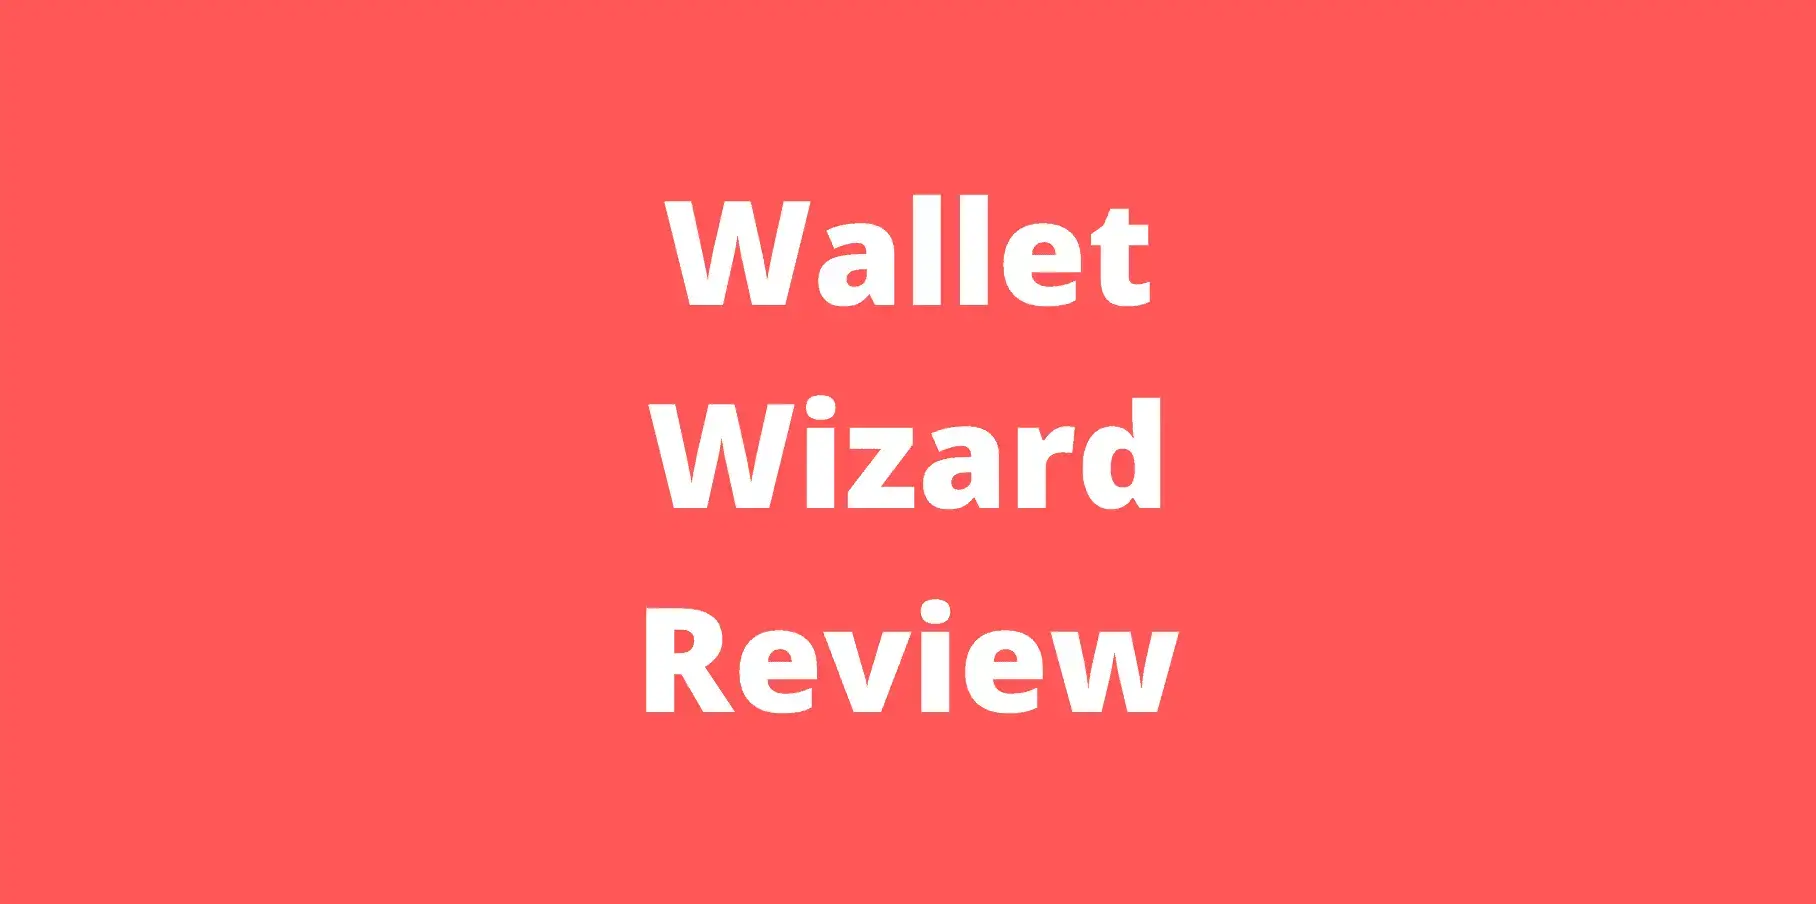 Review of Wallet Wizard